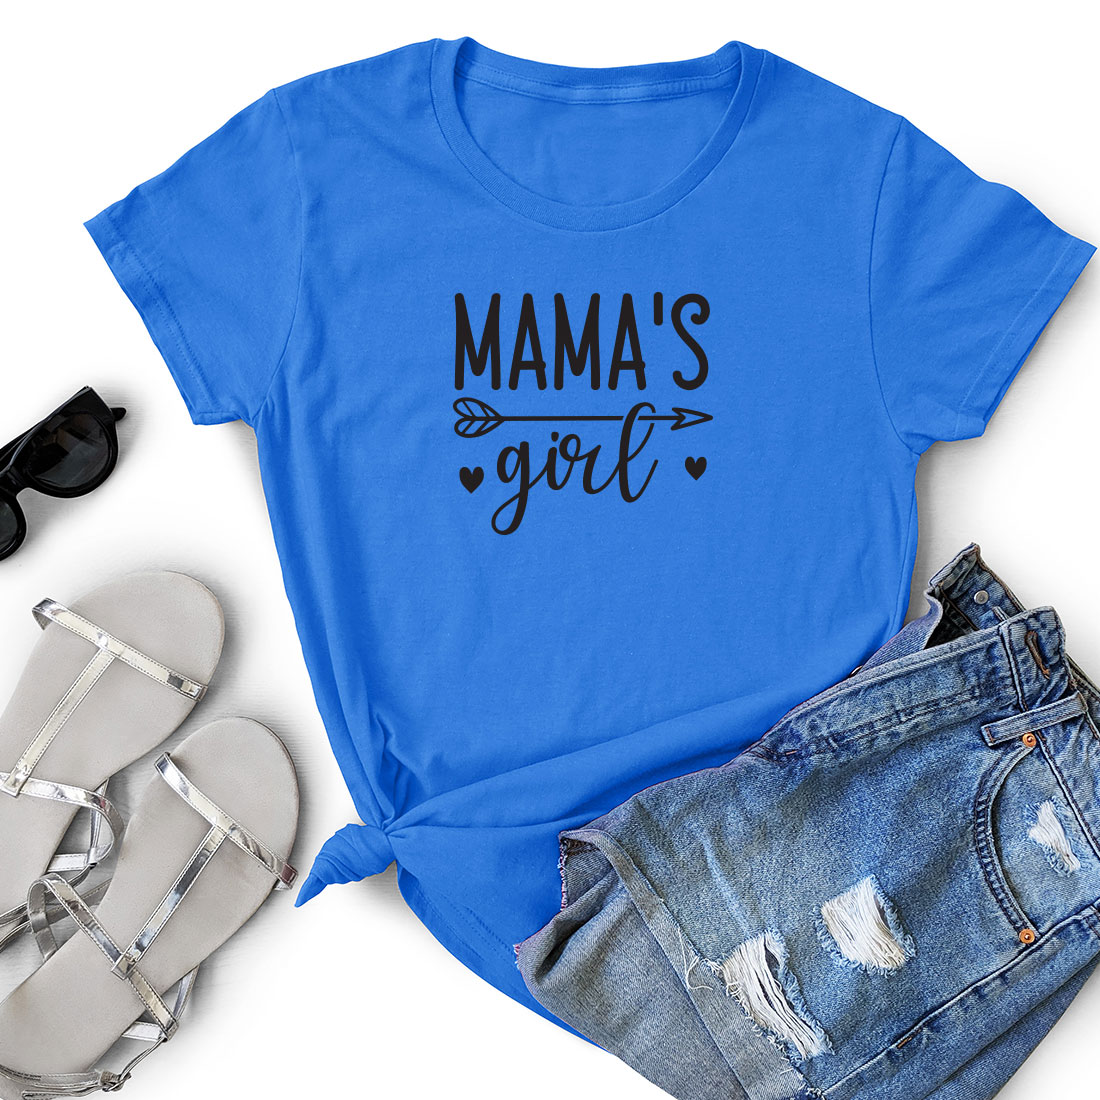 T - shirt that says mama's girl next to a pair of shorts.